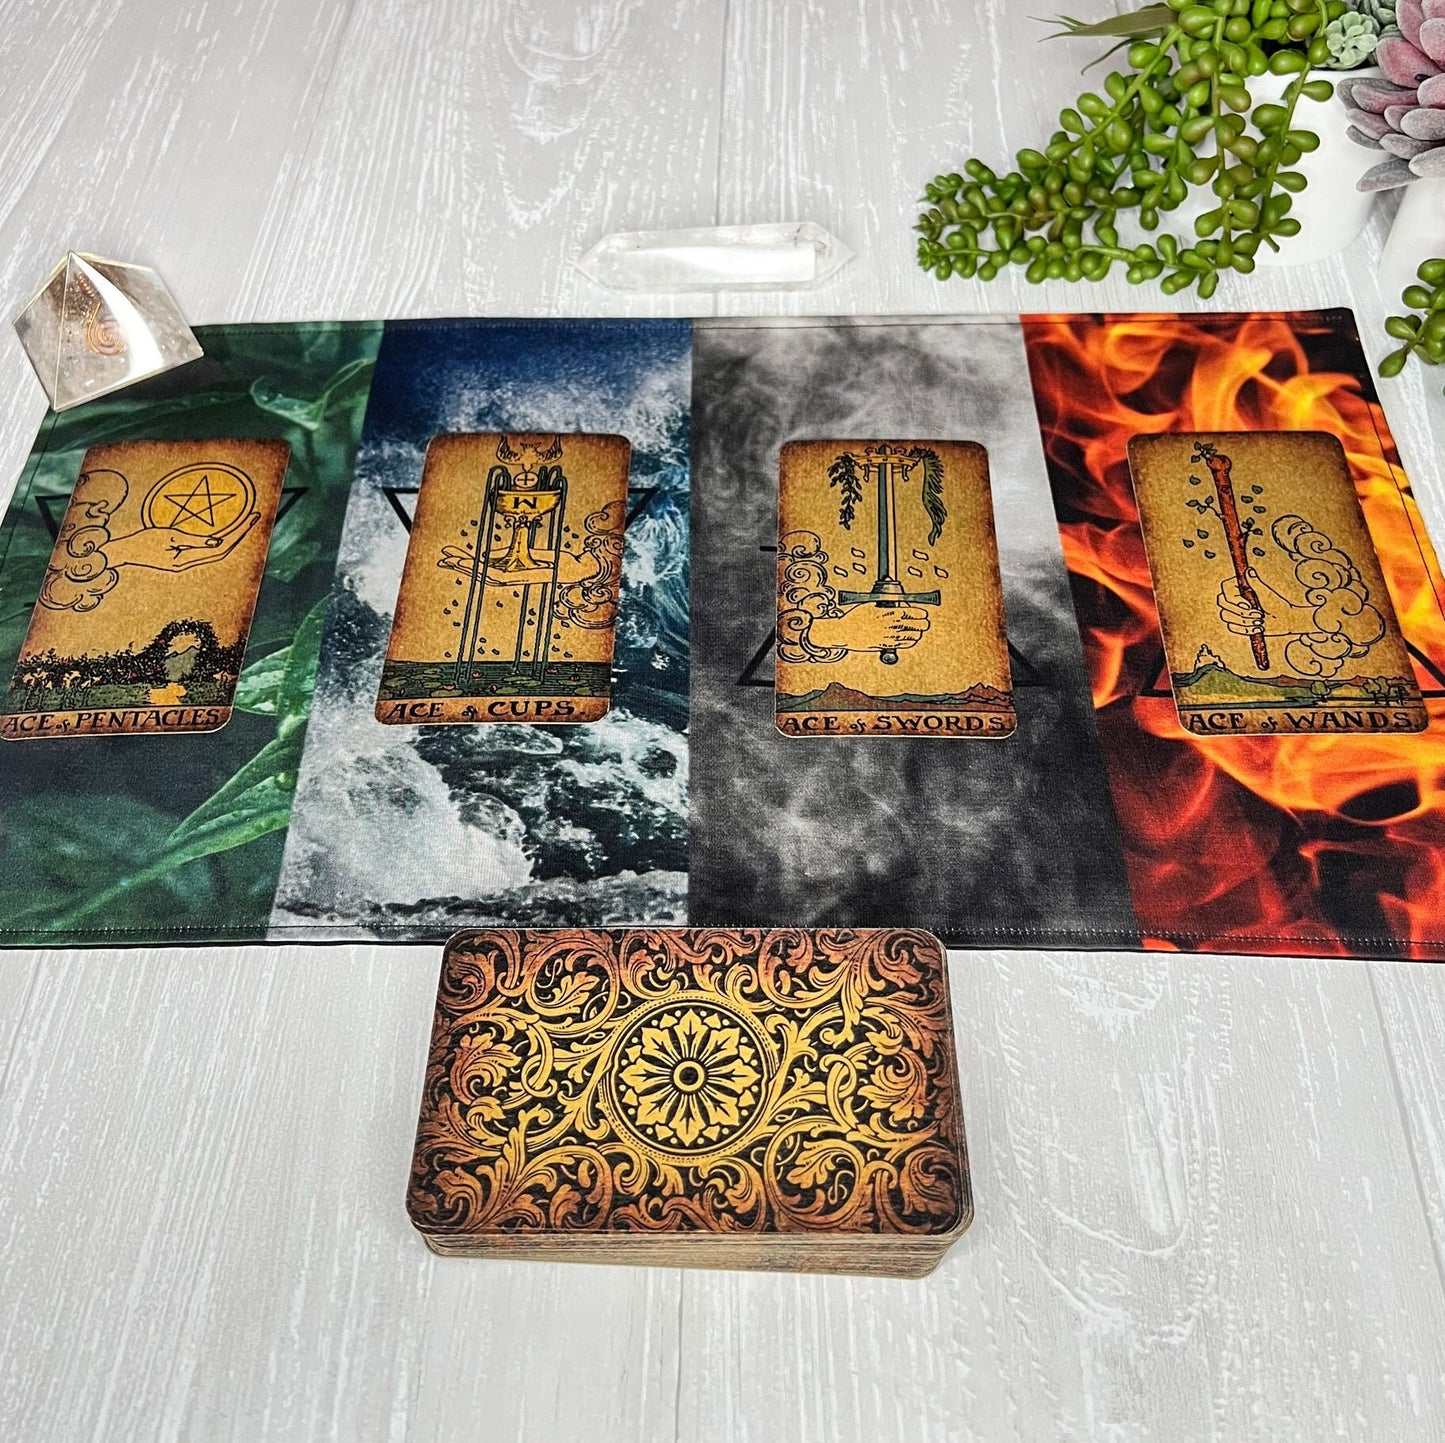 Alchemy Tarot Cloth, Rune Casting Cloth, Altar Ritual Cloth, Tarot Reading Supplies, Pagan Witchcraft Wiccan Gift Supplies, Elements